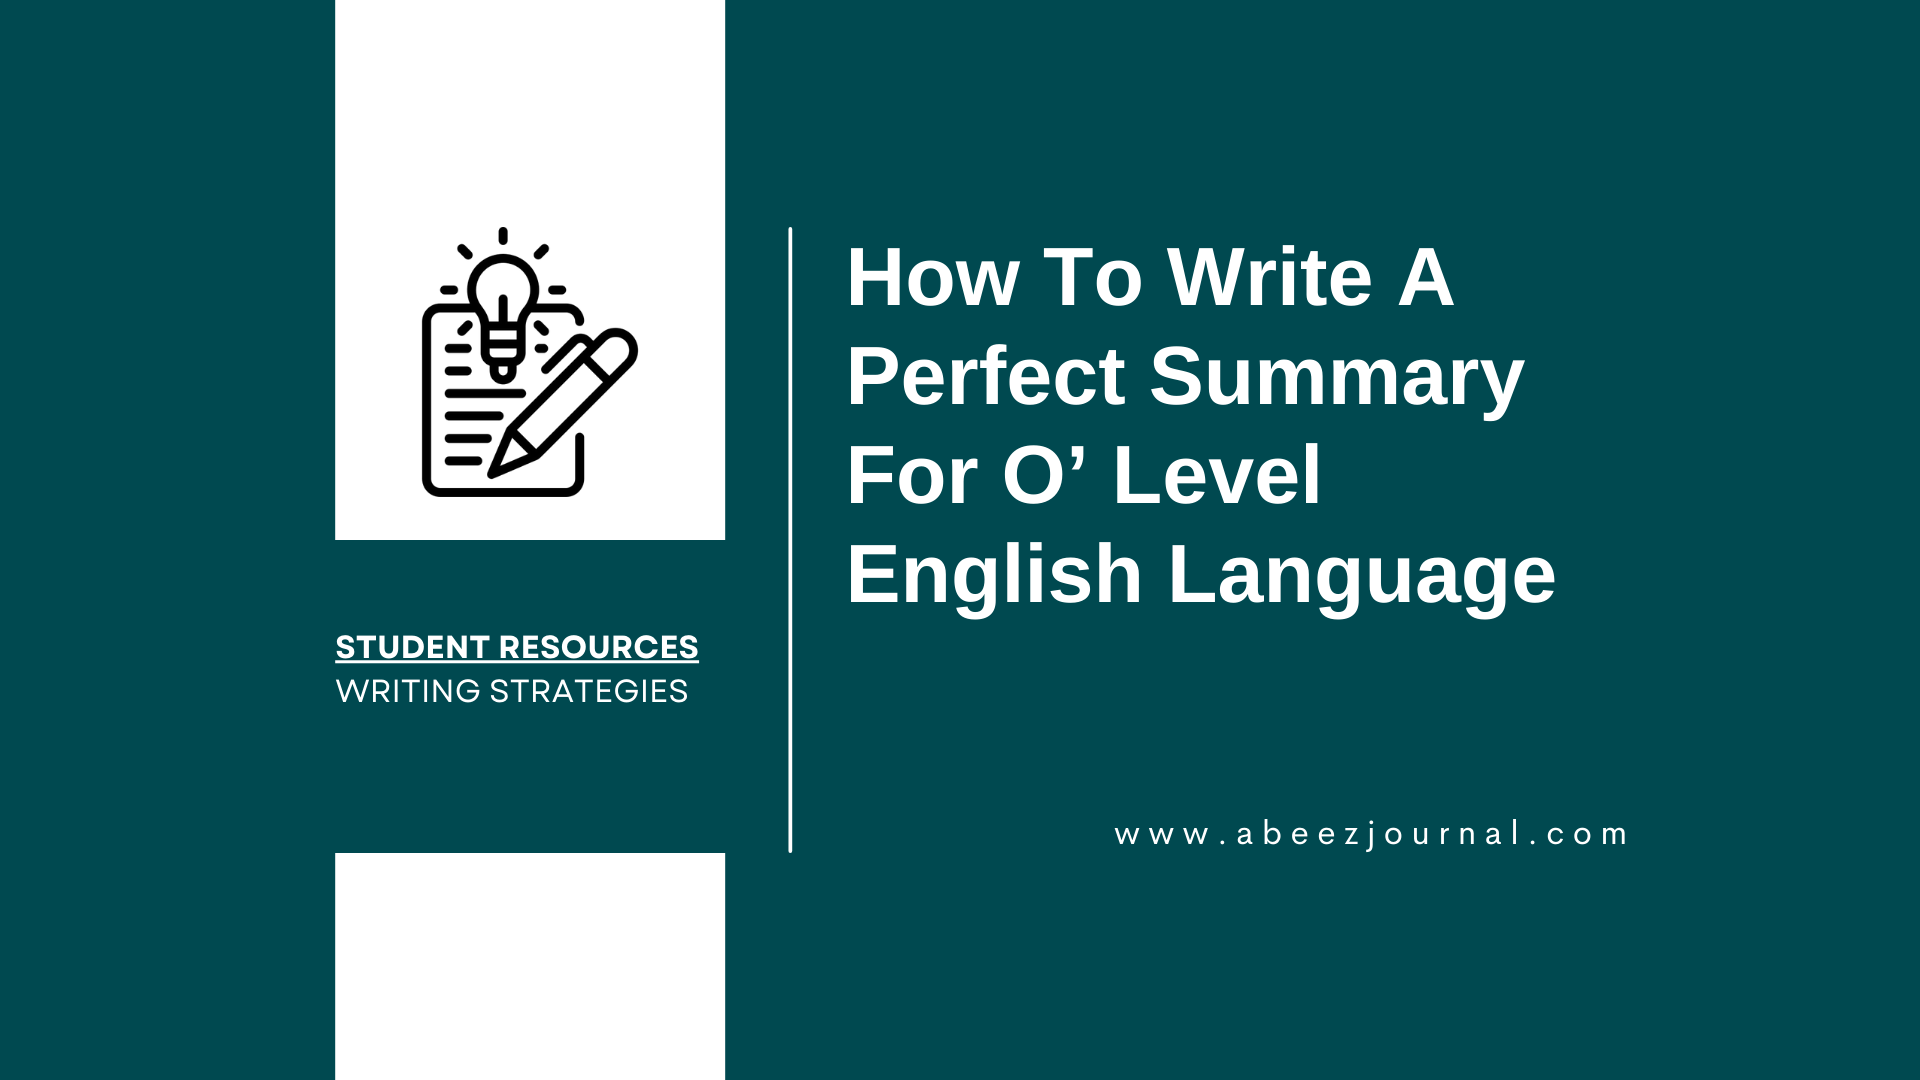 what is summary writing